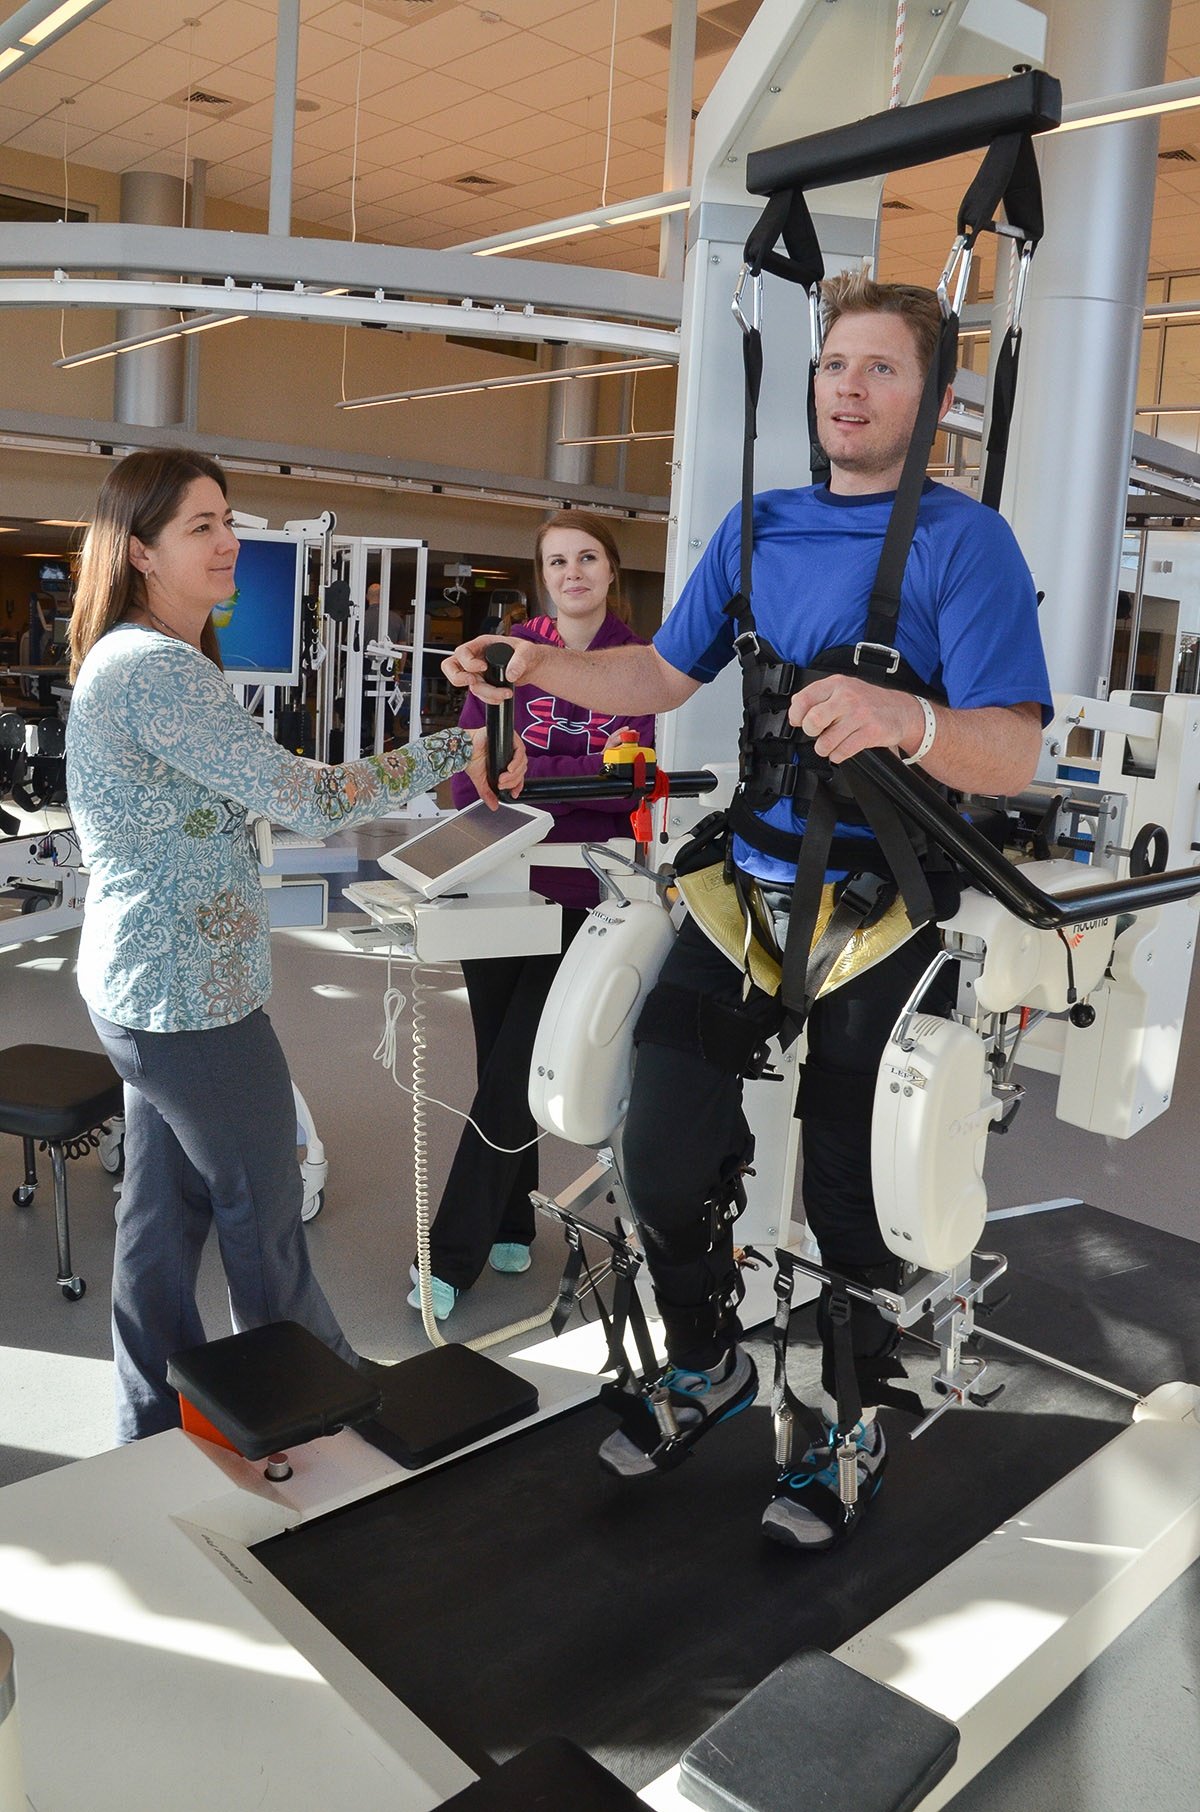 Jim Harris works with two physical therapists while strapped into an exercise machine 